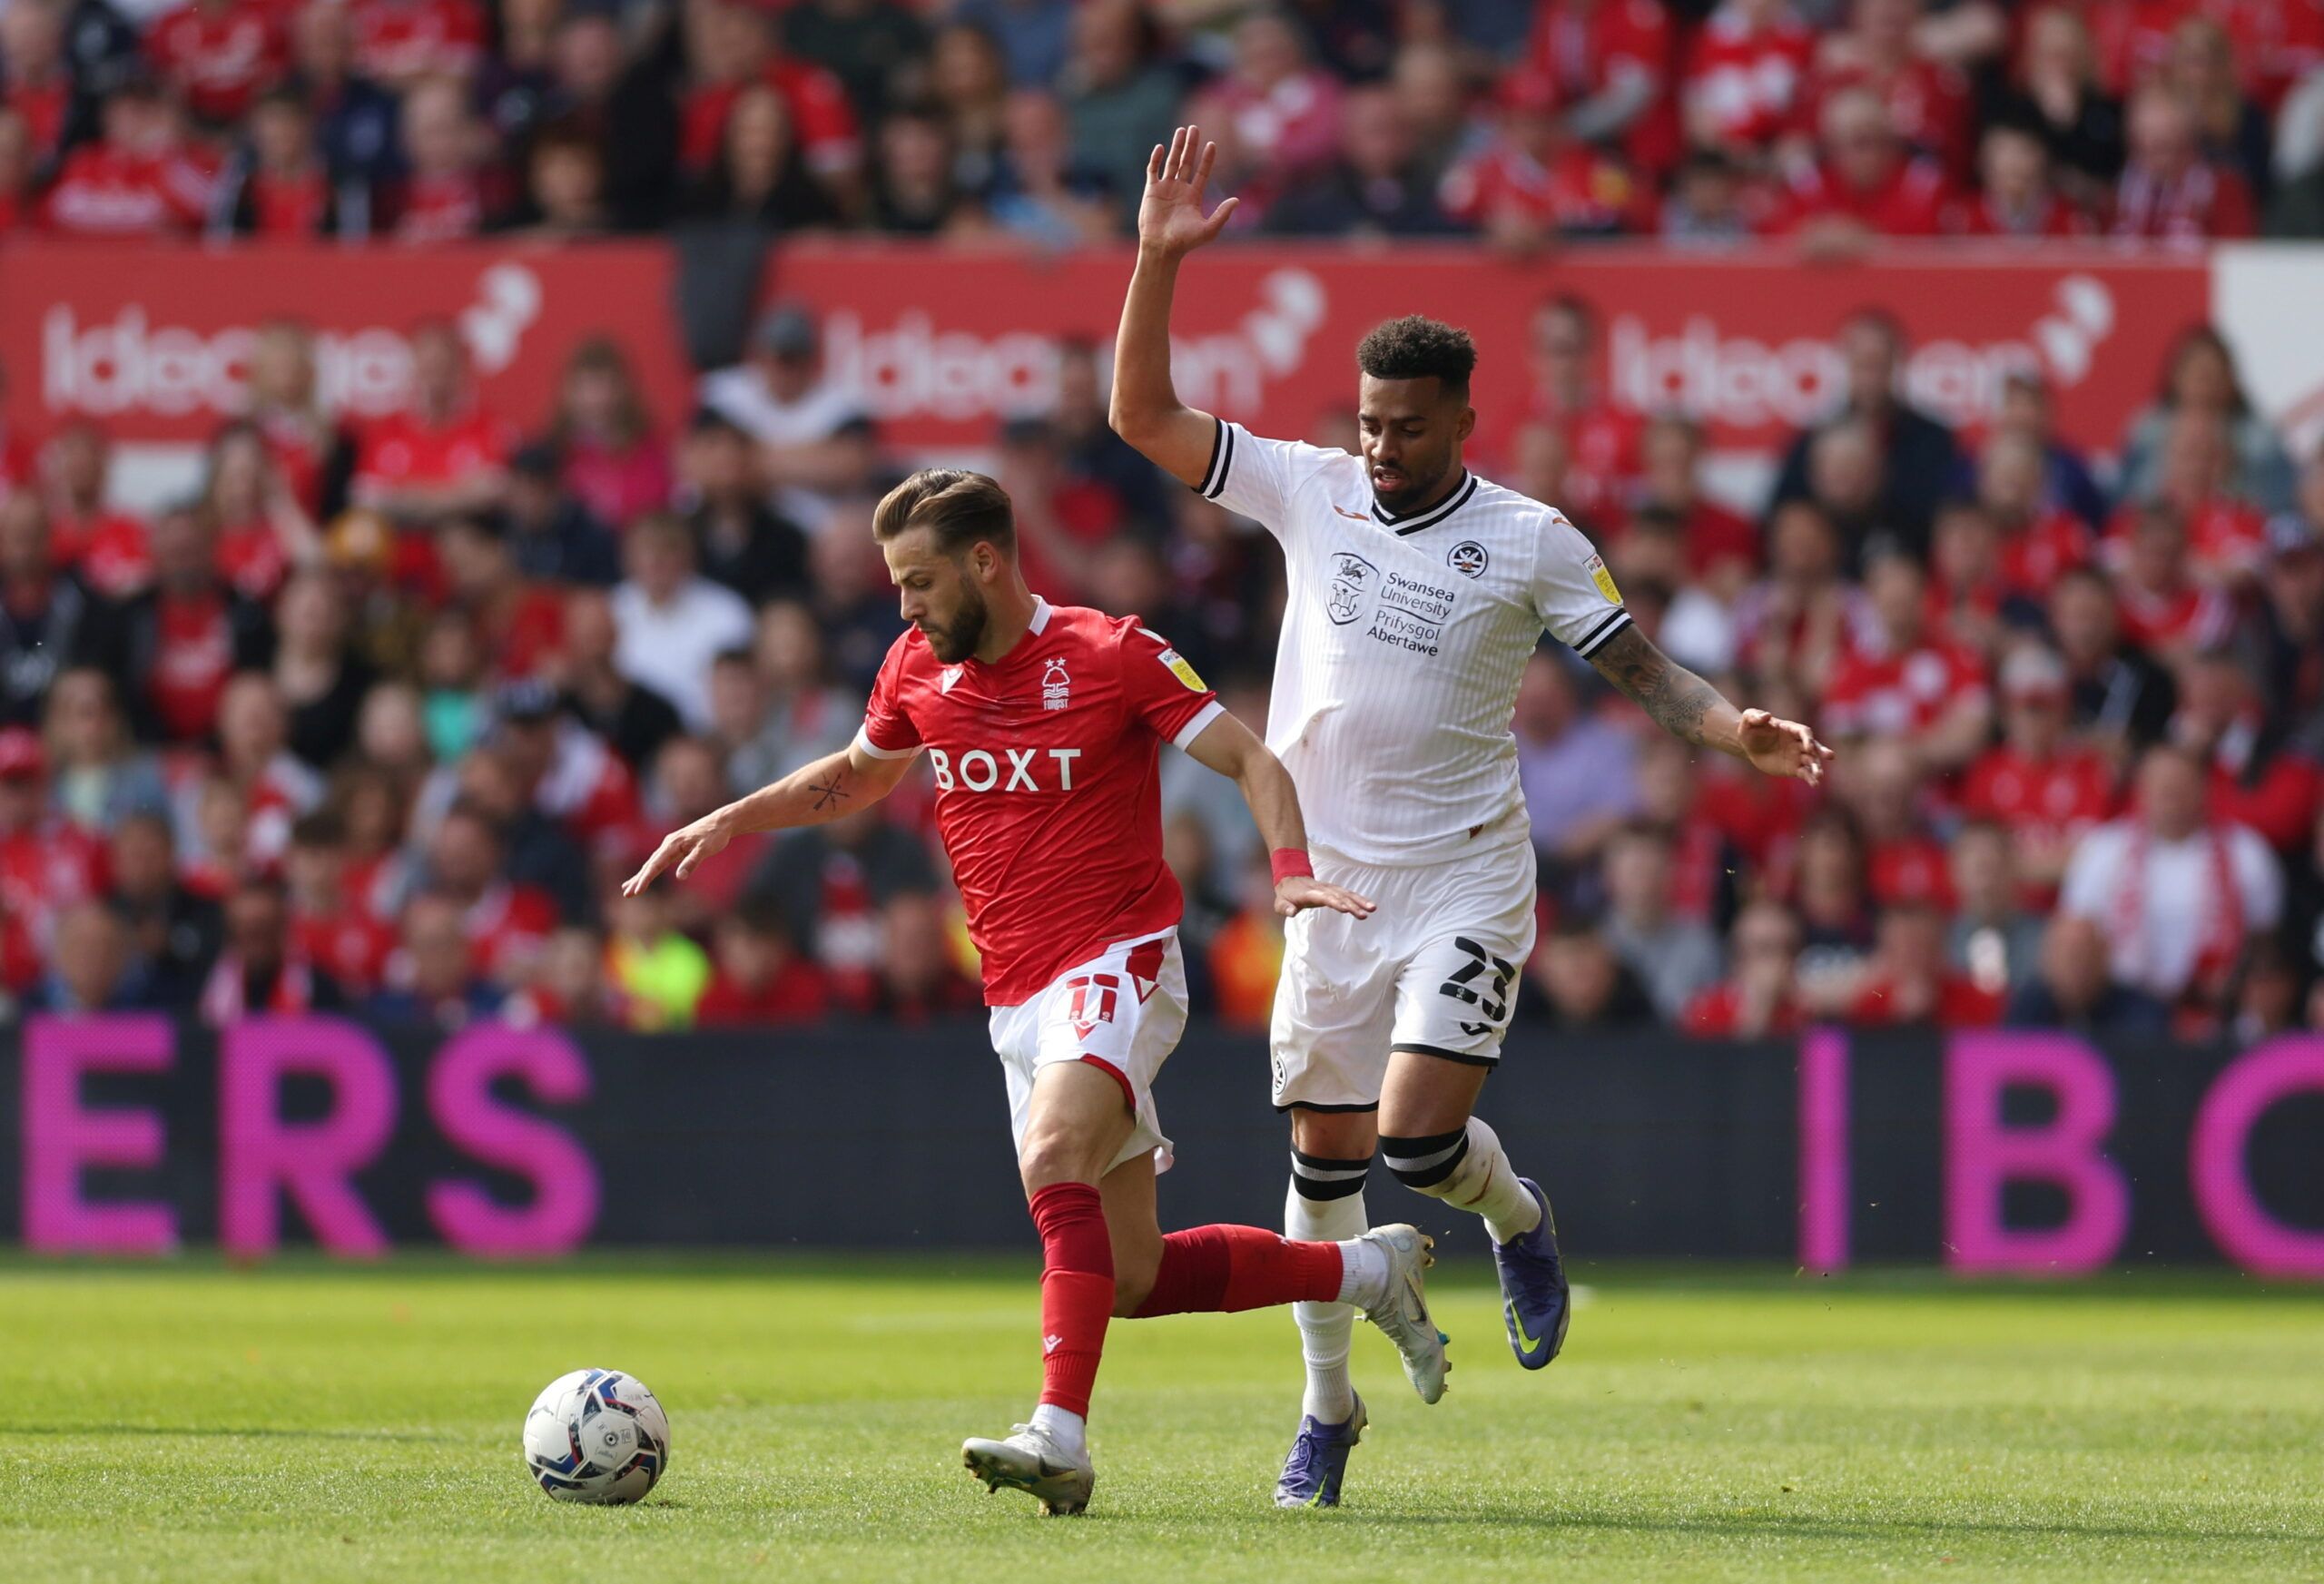 Soccer Football - Championship - Nottingham Forest v Swansea City - The City Ground, Nottingham, Britain - April 30, 2022 Nottingham Forest's Philip Zinckernagel in action with Swansea City's Cyrus Christie Action Images/Matthew Childs  EDITORIAL USE ONLY. No use with unauthorized audio, video, data, fixture lists, club/league logos or 